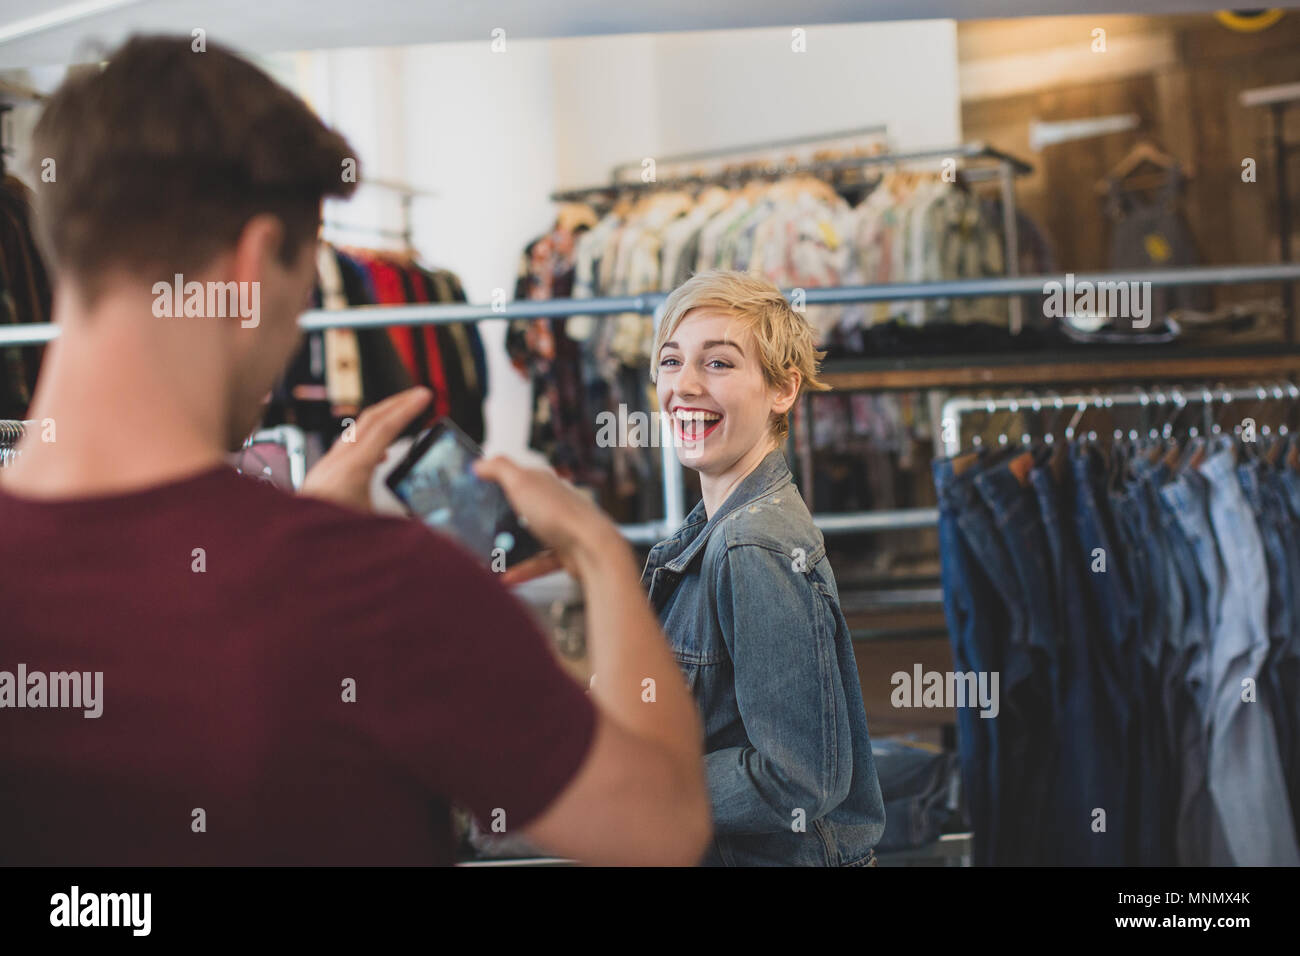 Millennial couple in a vintage clothing store Stock Photo